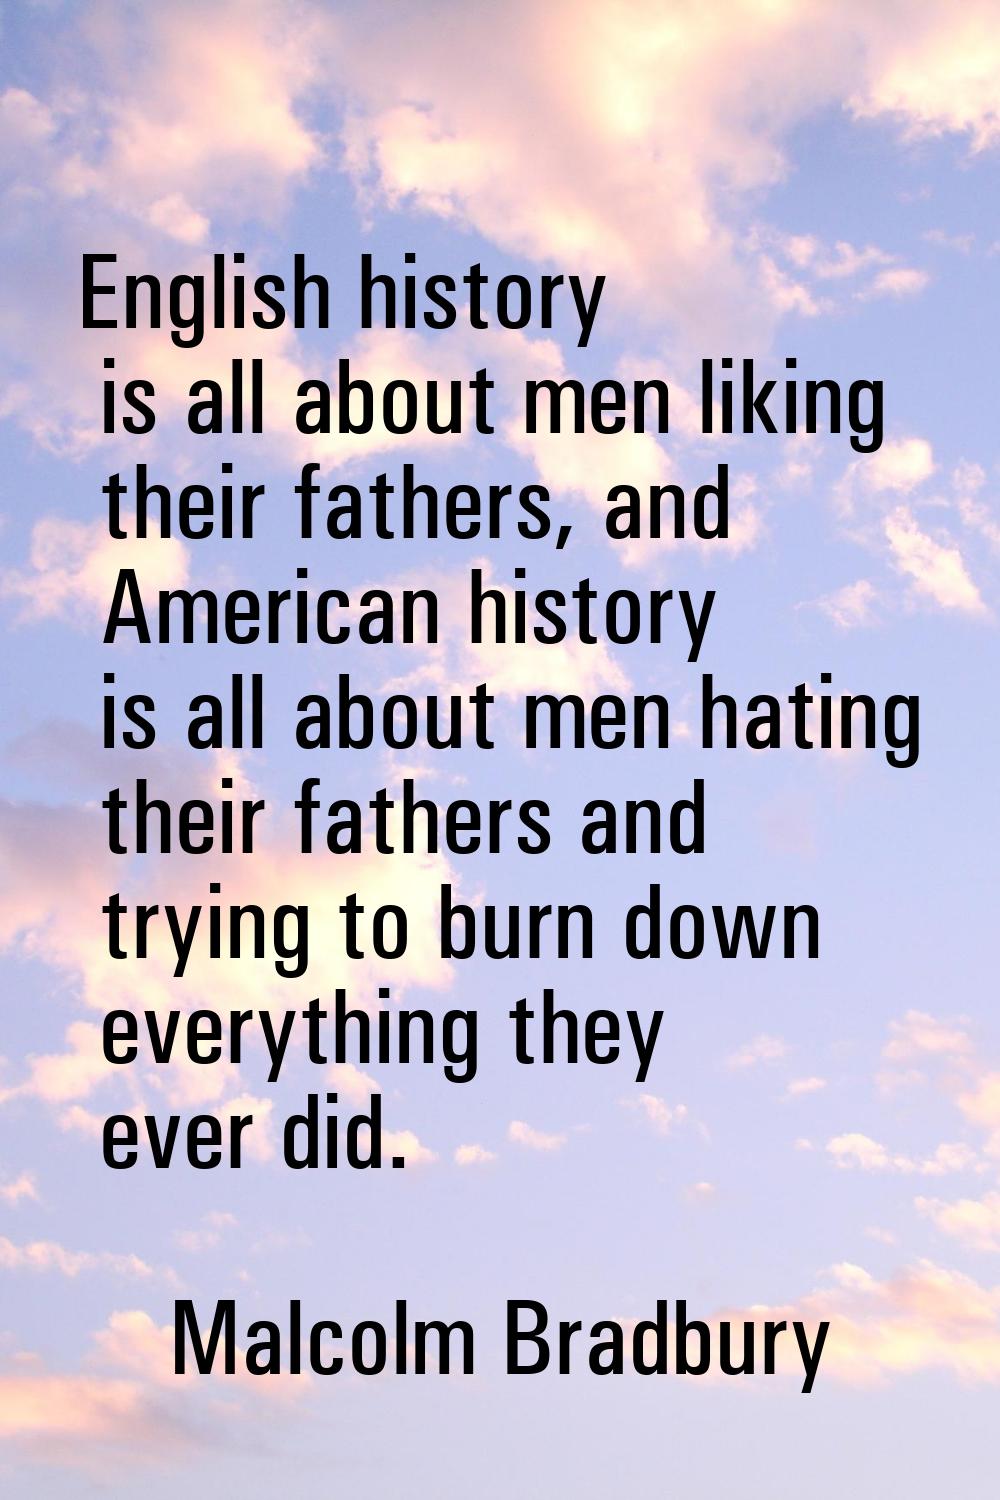 English history is all about men liking their fathers, and American history is all about men hating